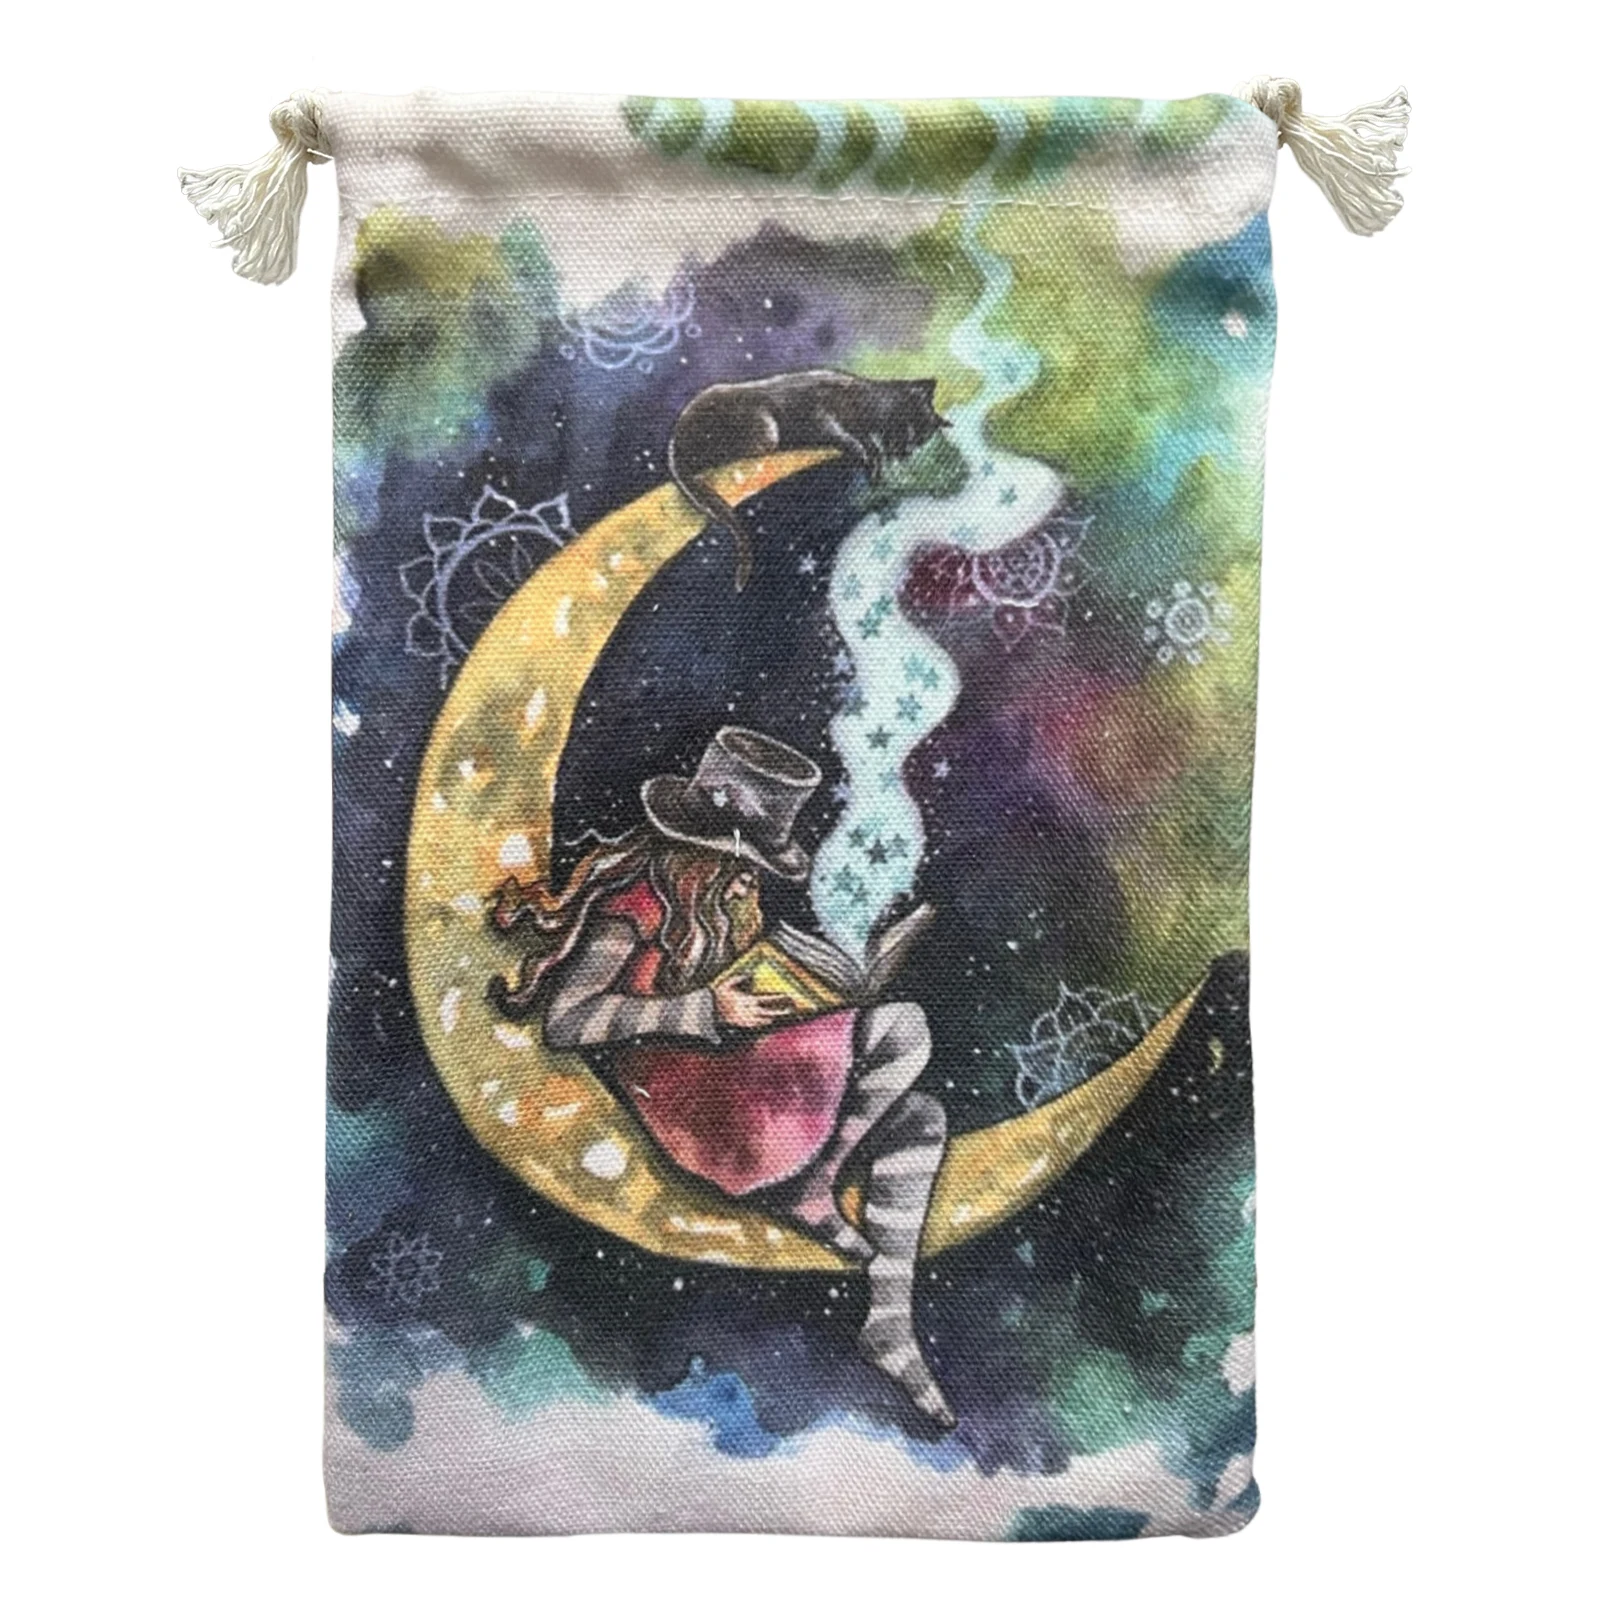 

Tarot Card Velvet Bag Embroidery Drawstring Tarot Bags Tarot Dice Bag Protect The Card From Damage For Jewelry Gifts Event